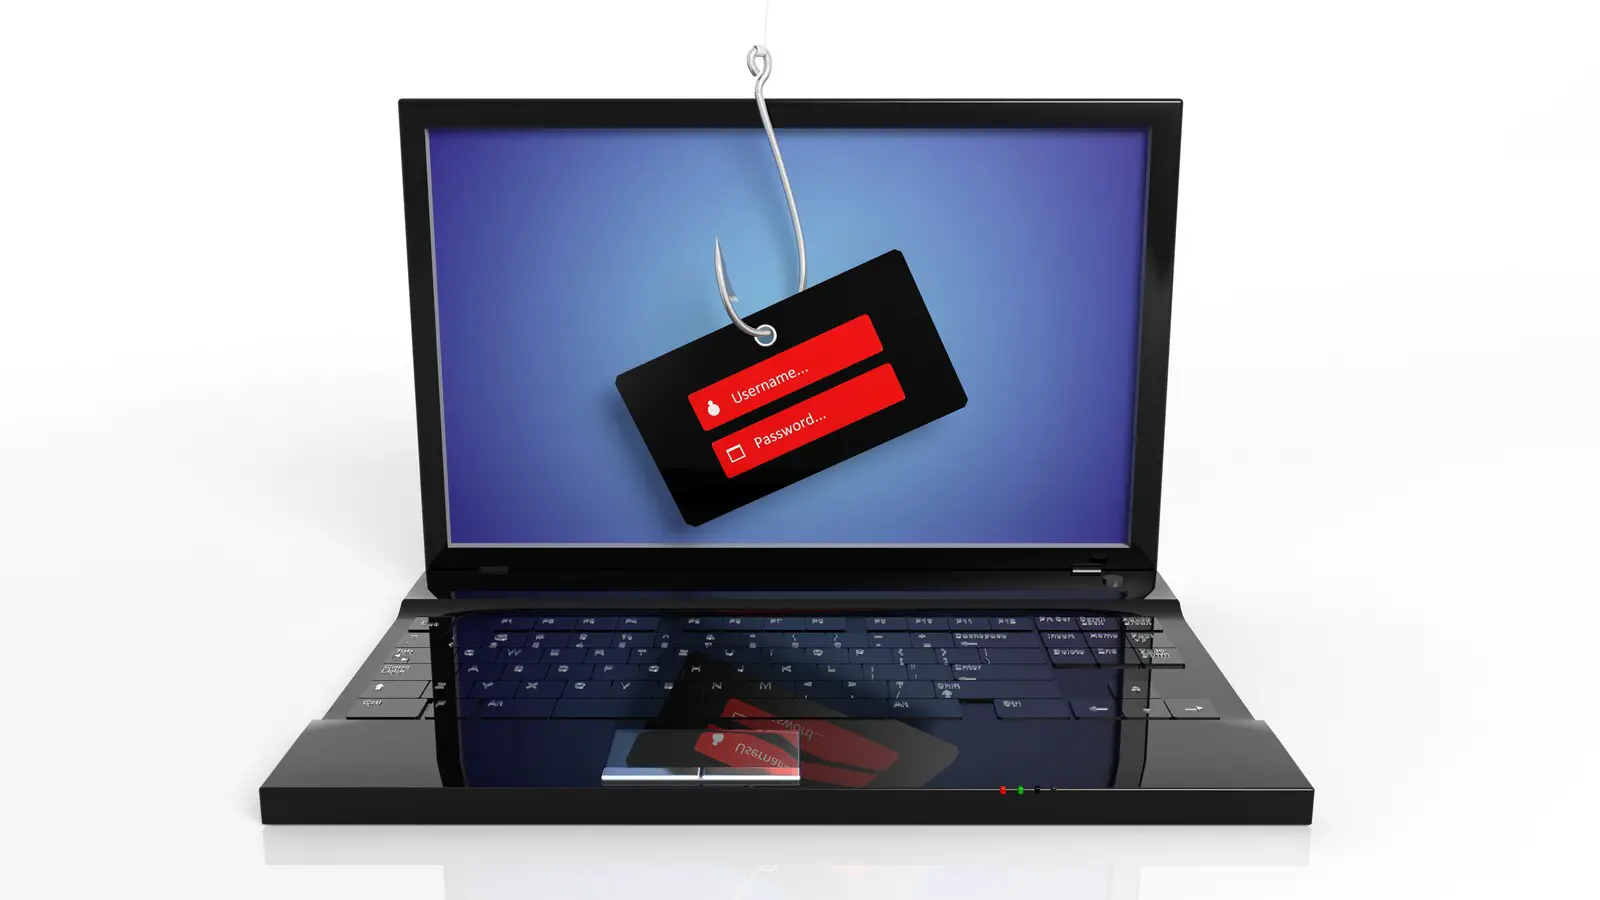 Fishing hook hanging on a laptop screen with username and password tag, representing a phishing scam